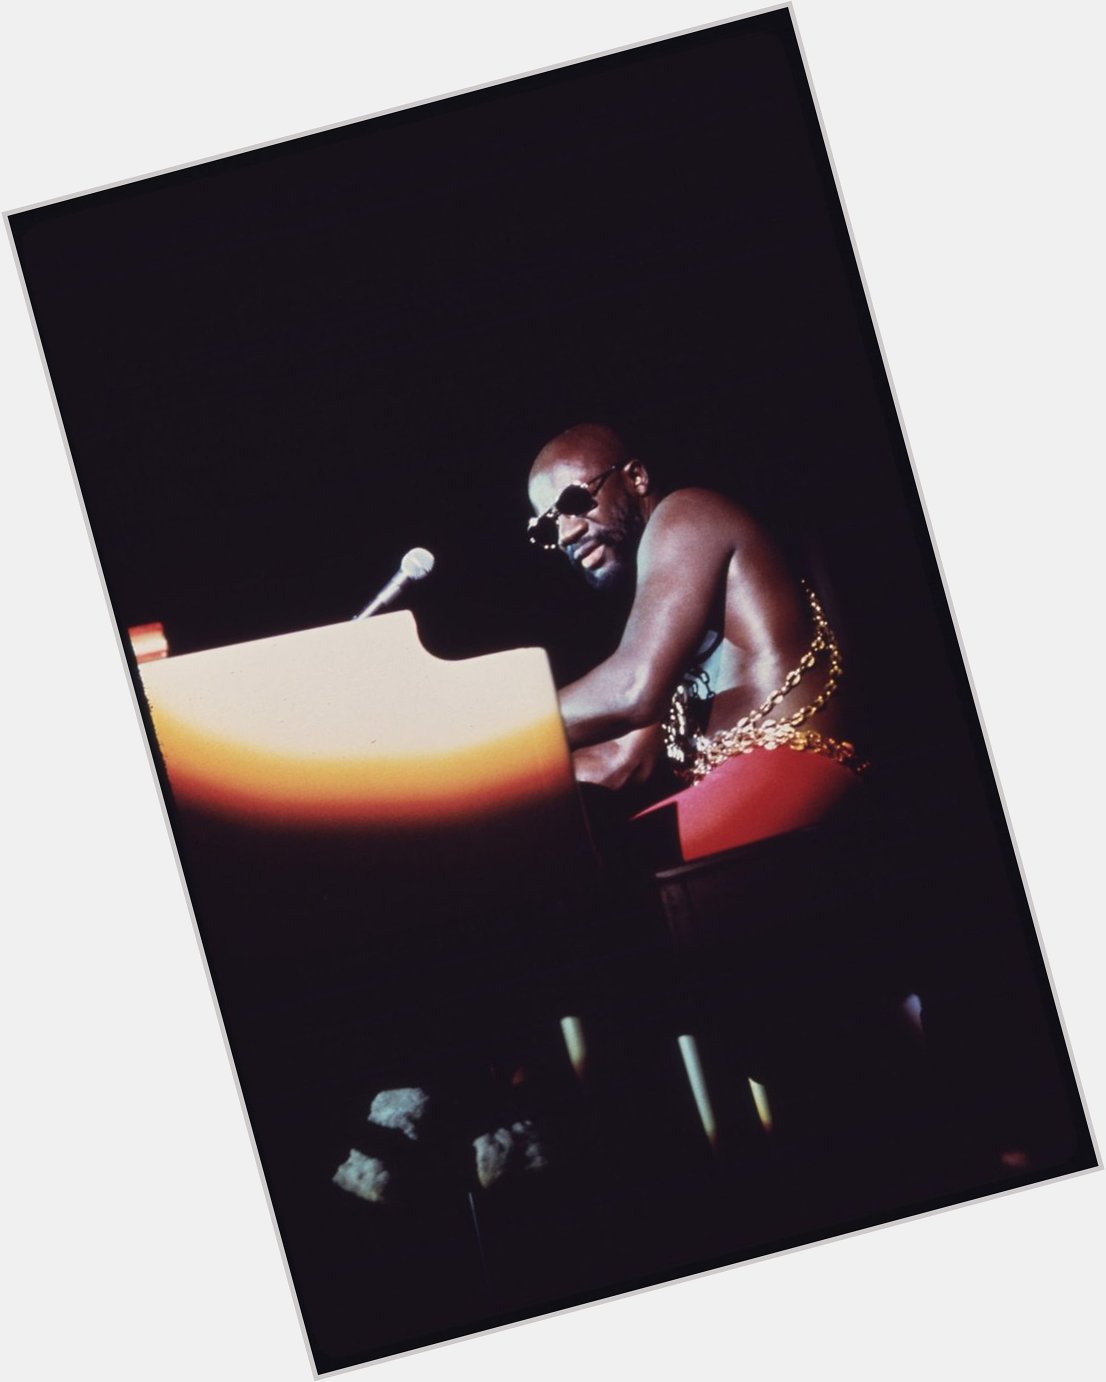 Happy birthday to one of the greatest soul artists of all time, Isaac Hayes! He would ve been 80 today 